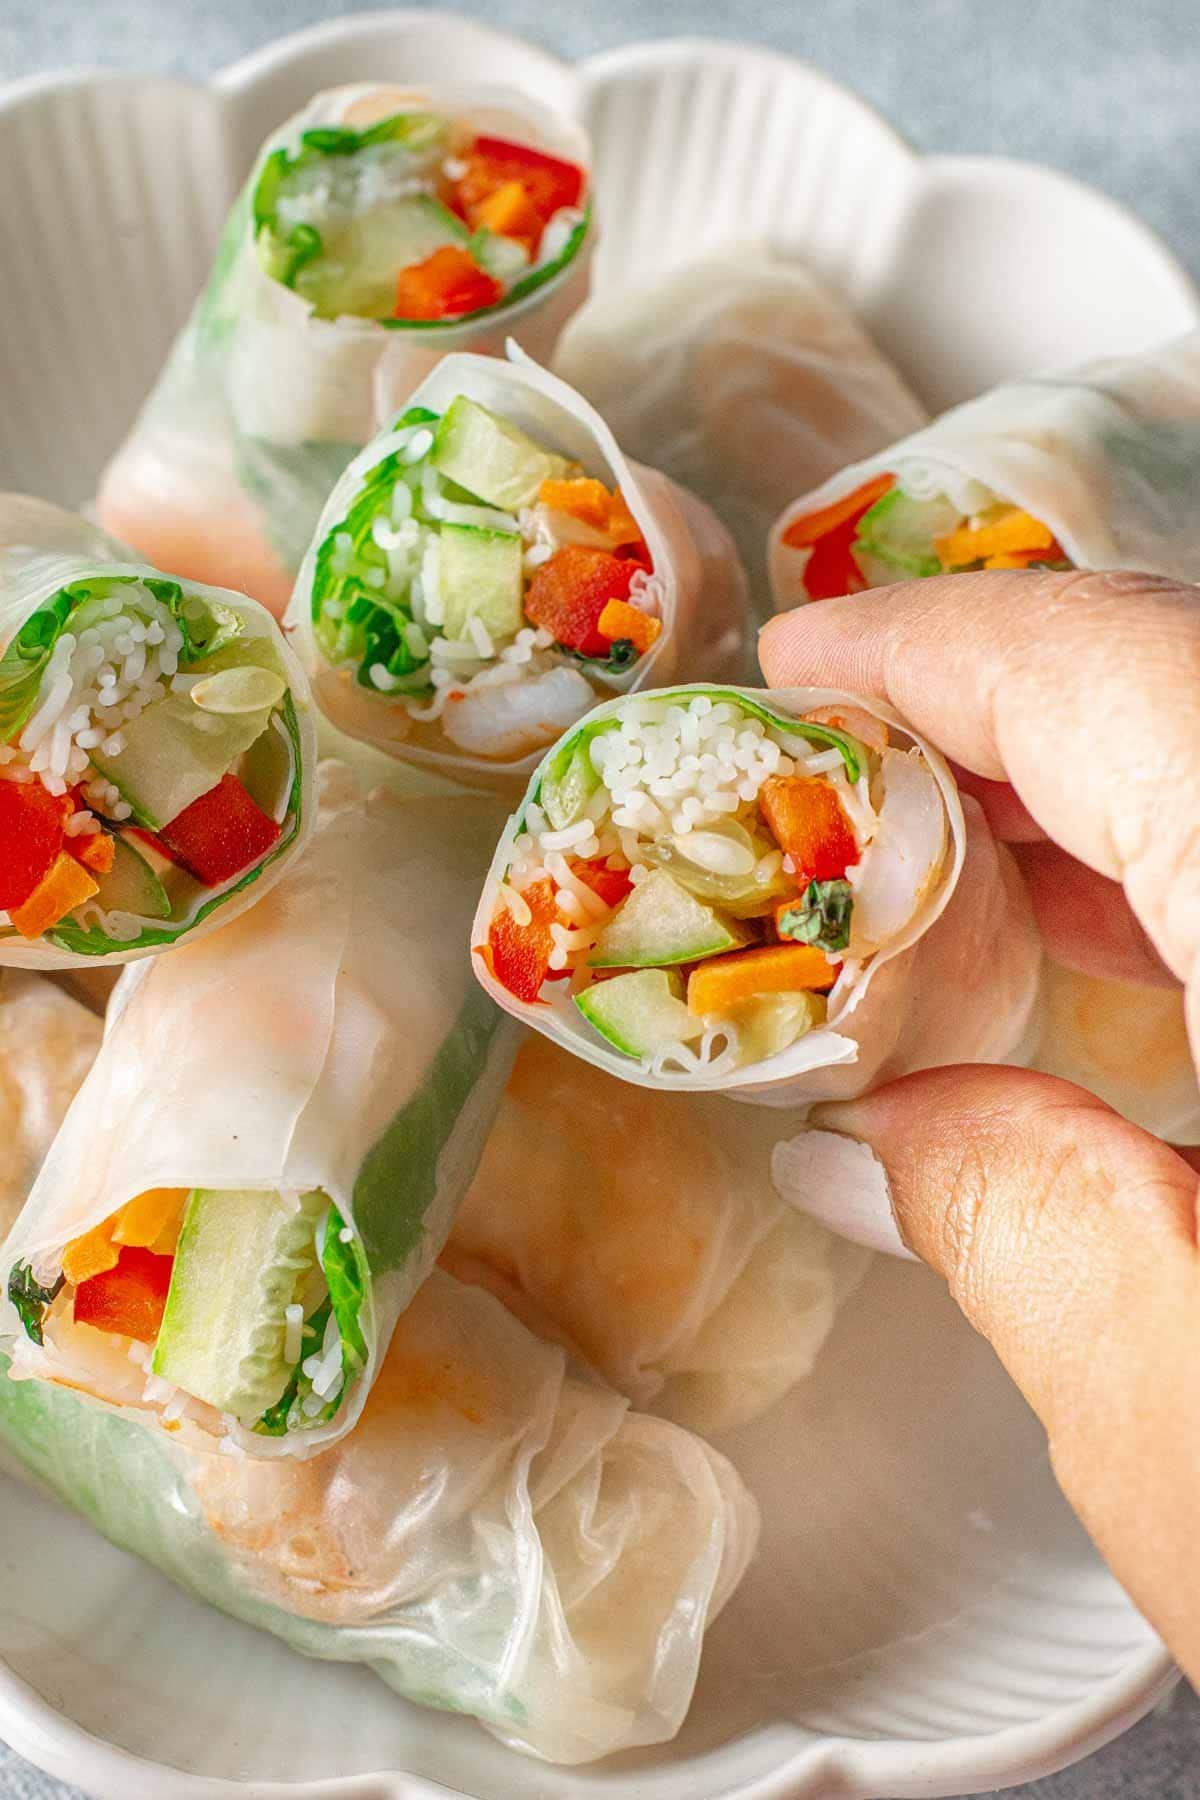 Spring Rolls cut open to reveal the shrimp and veggies inside.